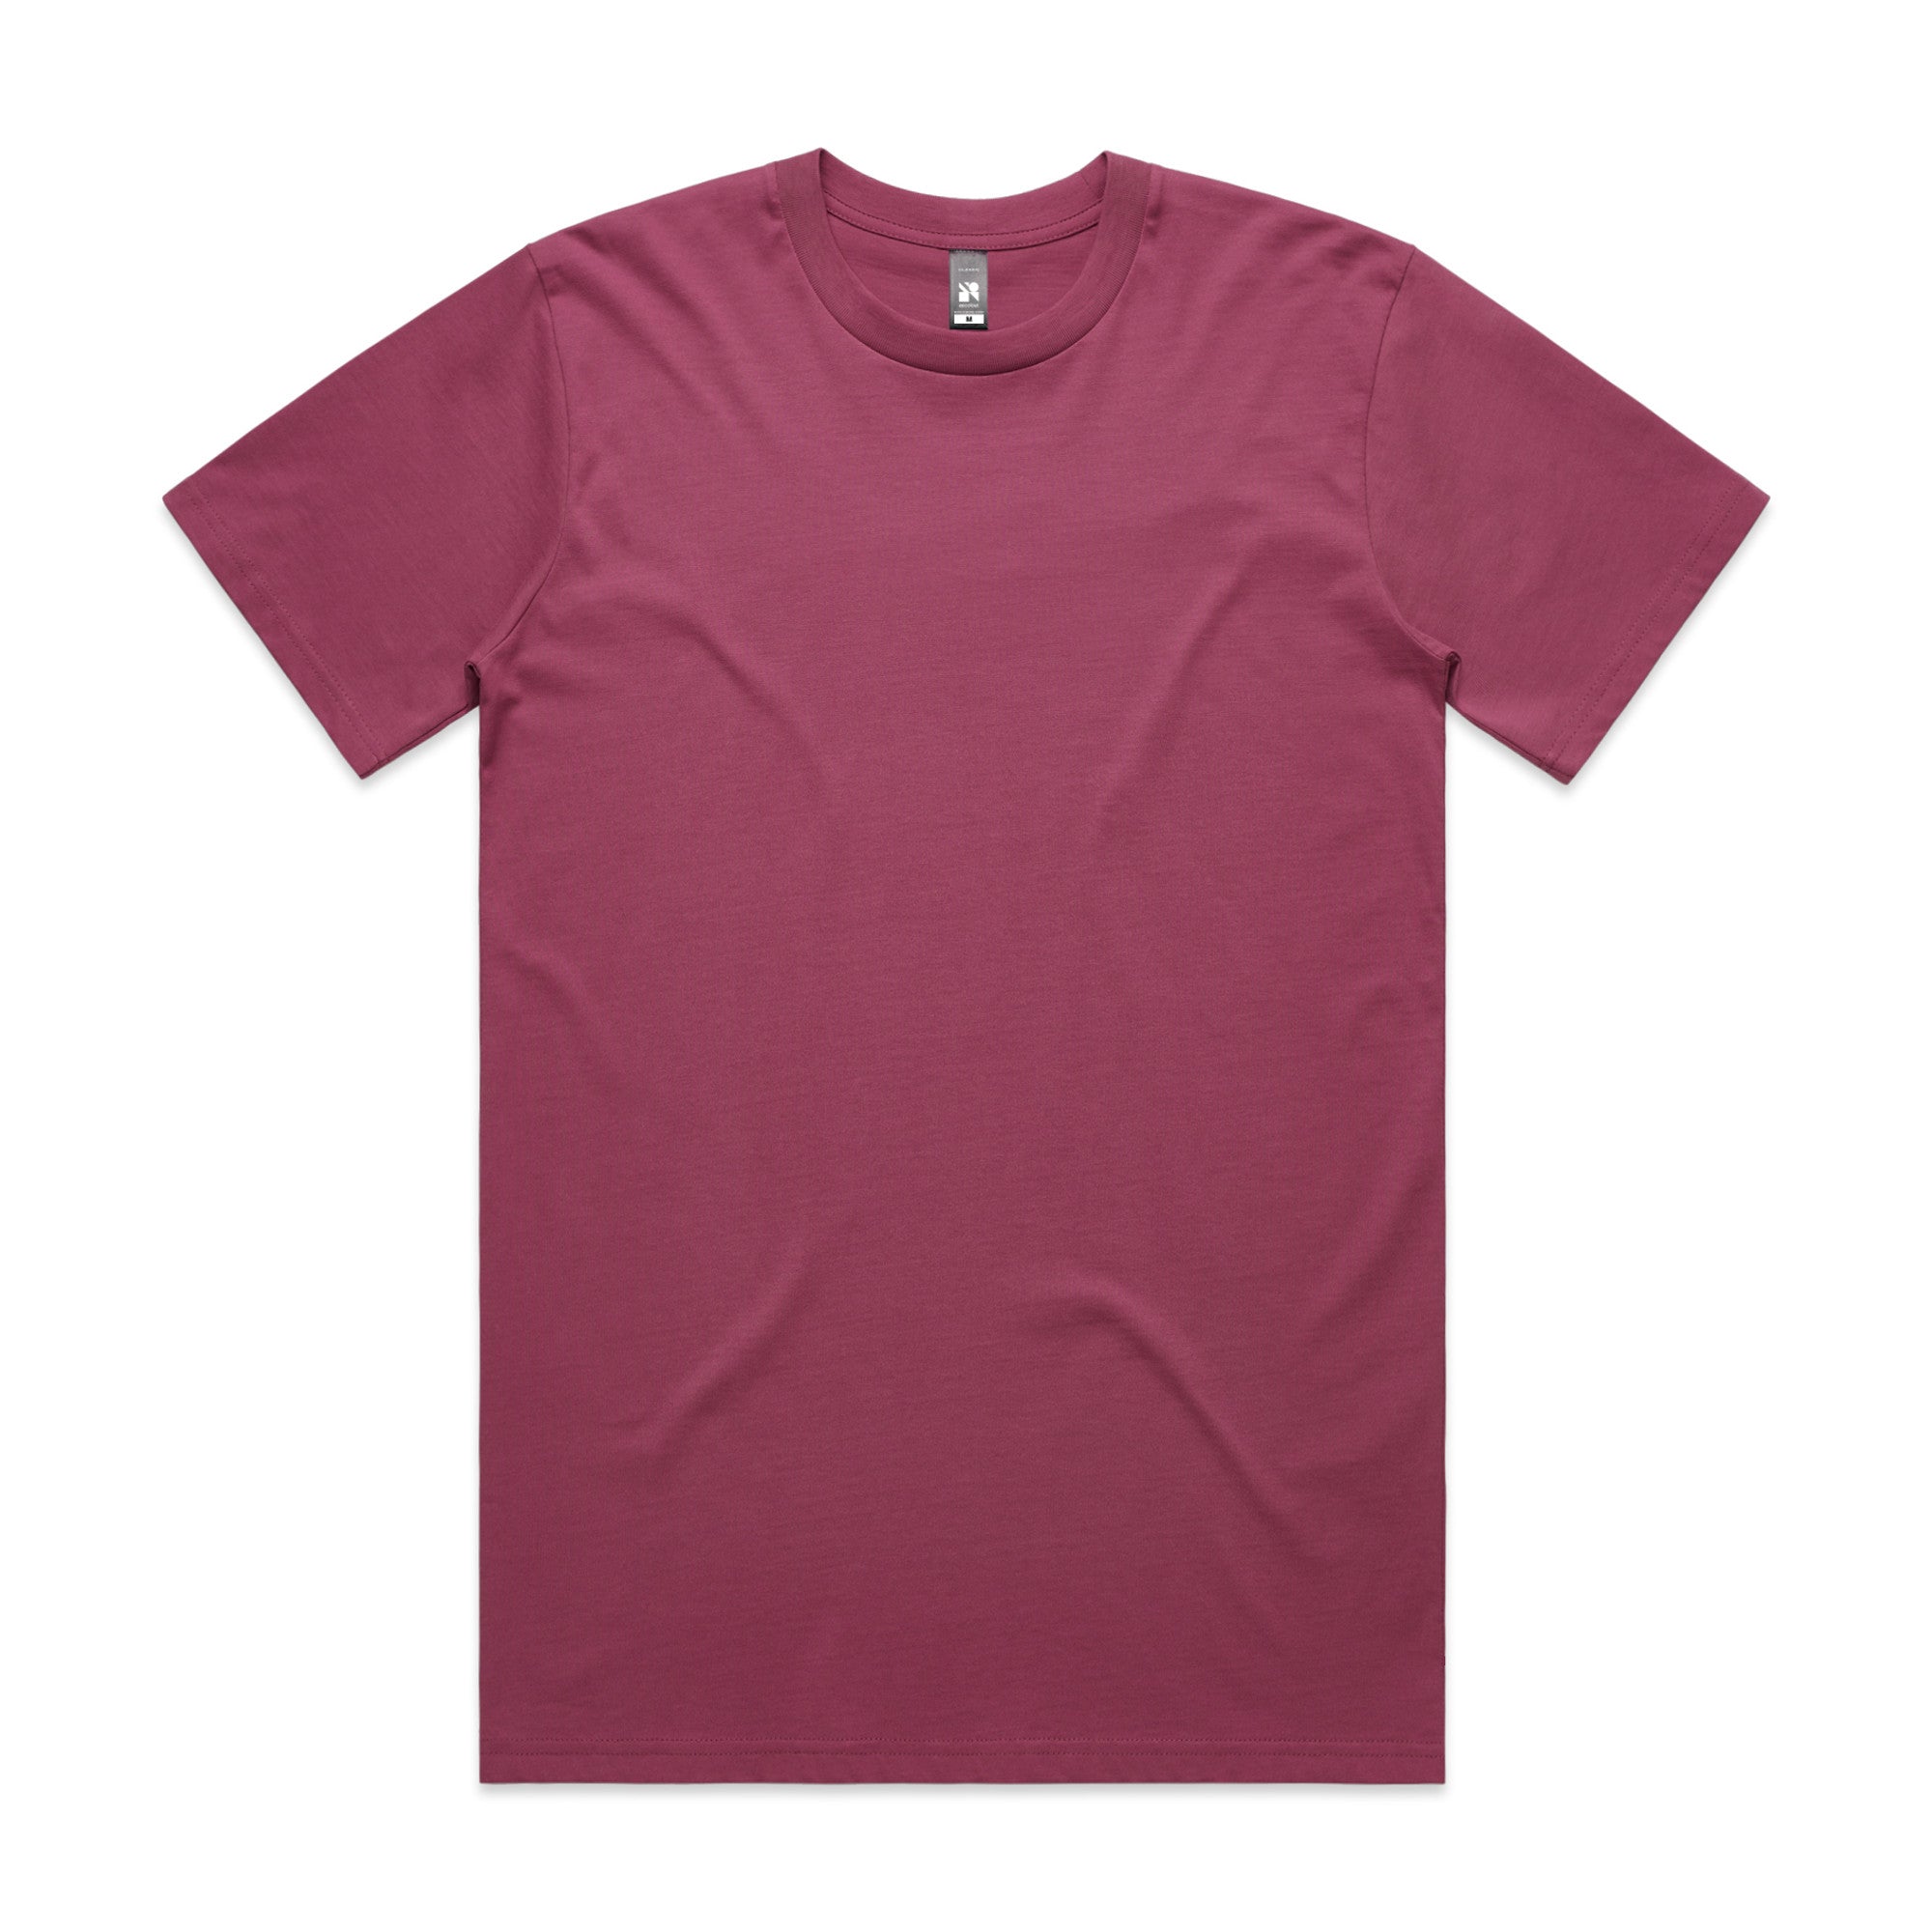 AS Colour Mens Classic Tee 5026 Size S